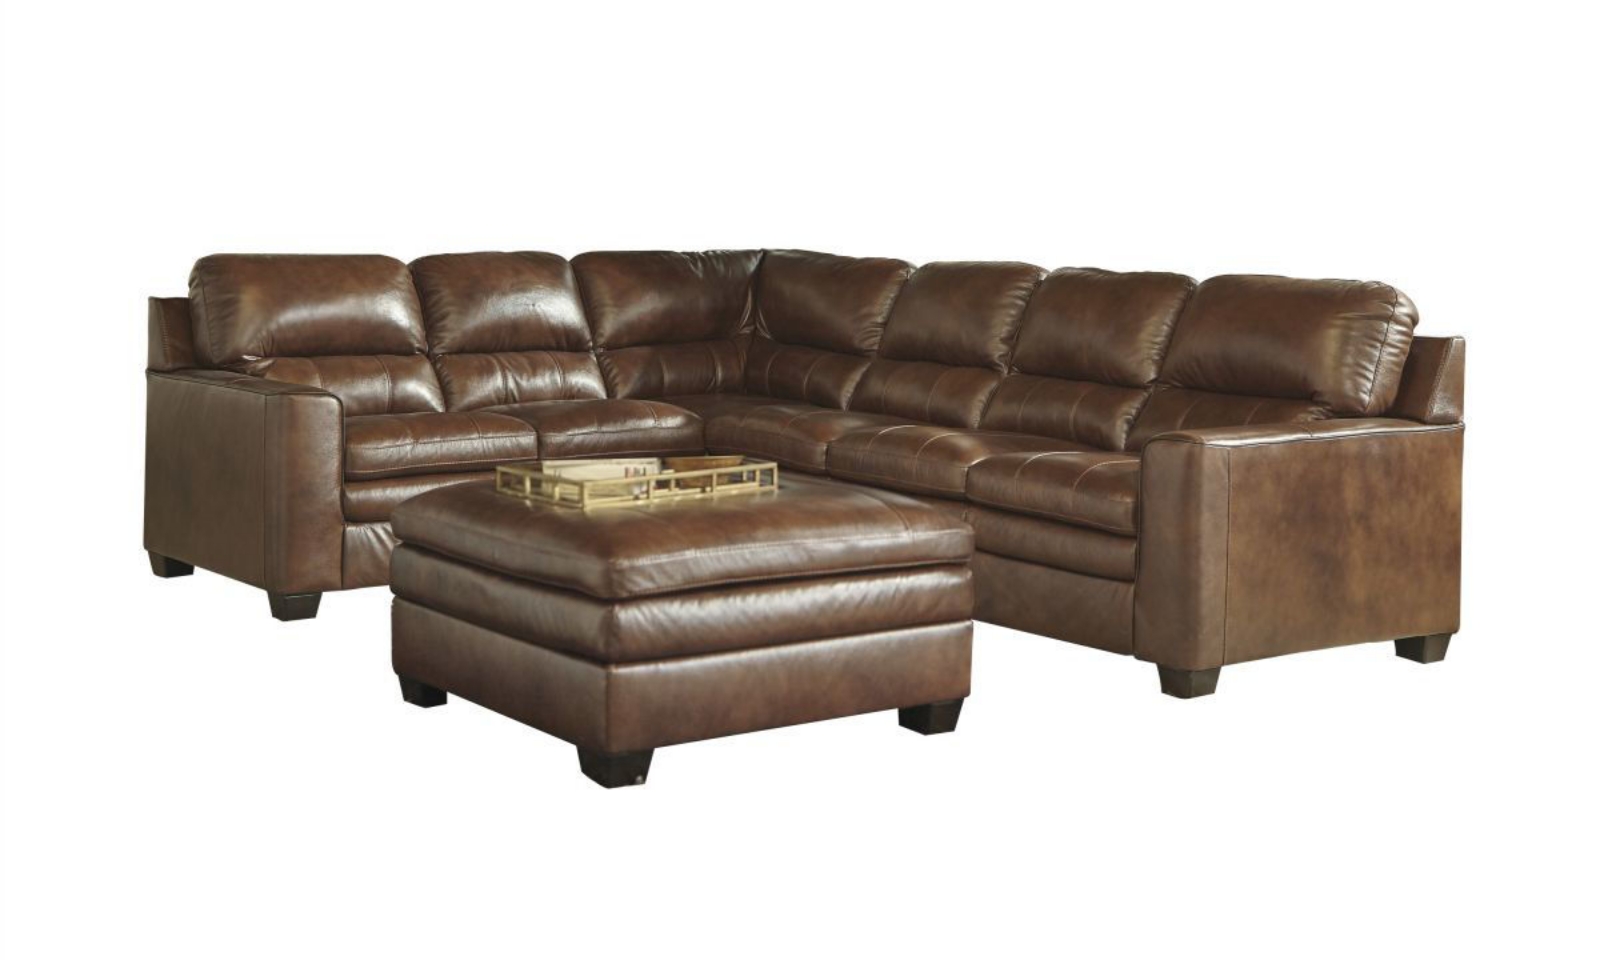 Picture of Gleason Sectional with Ottoman